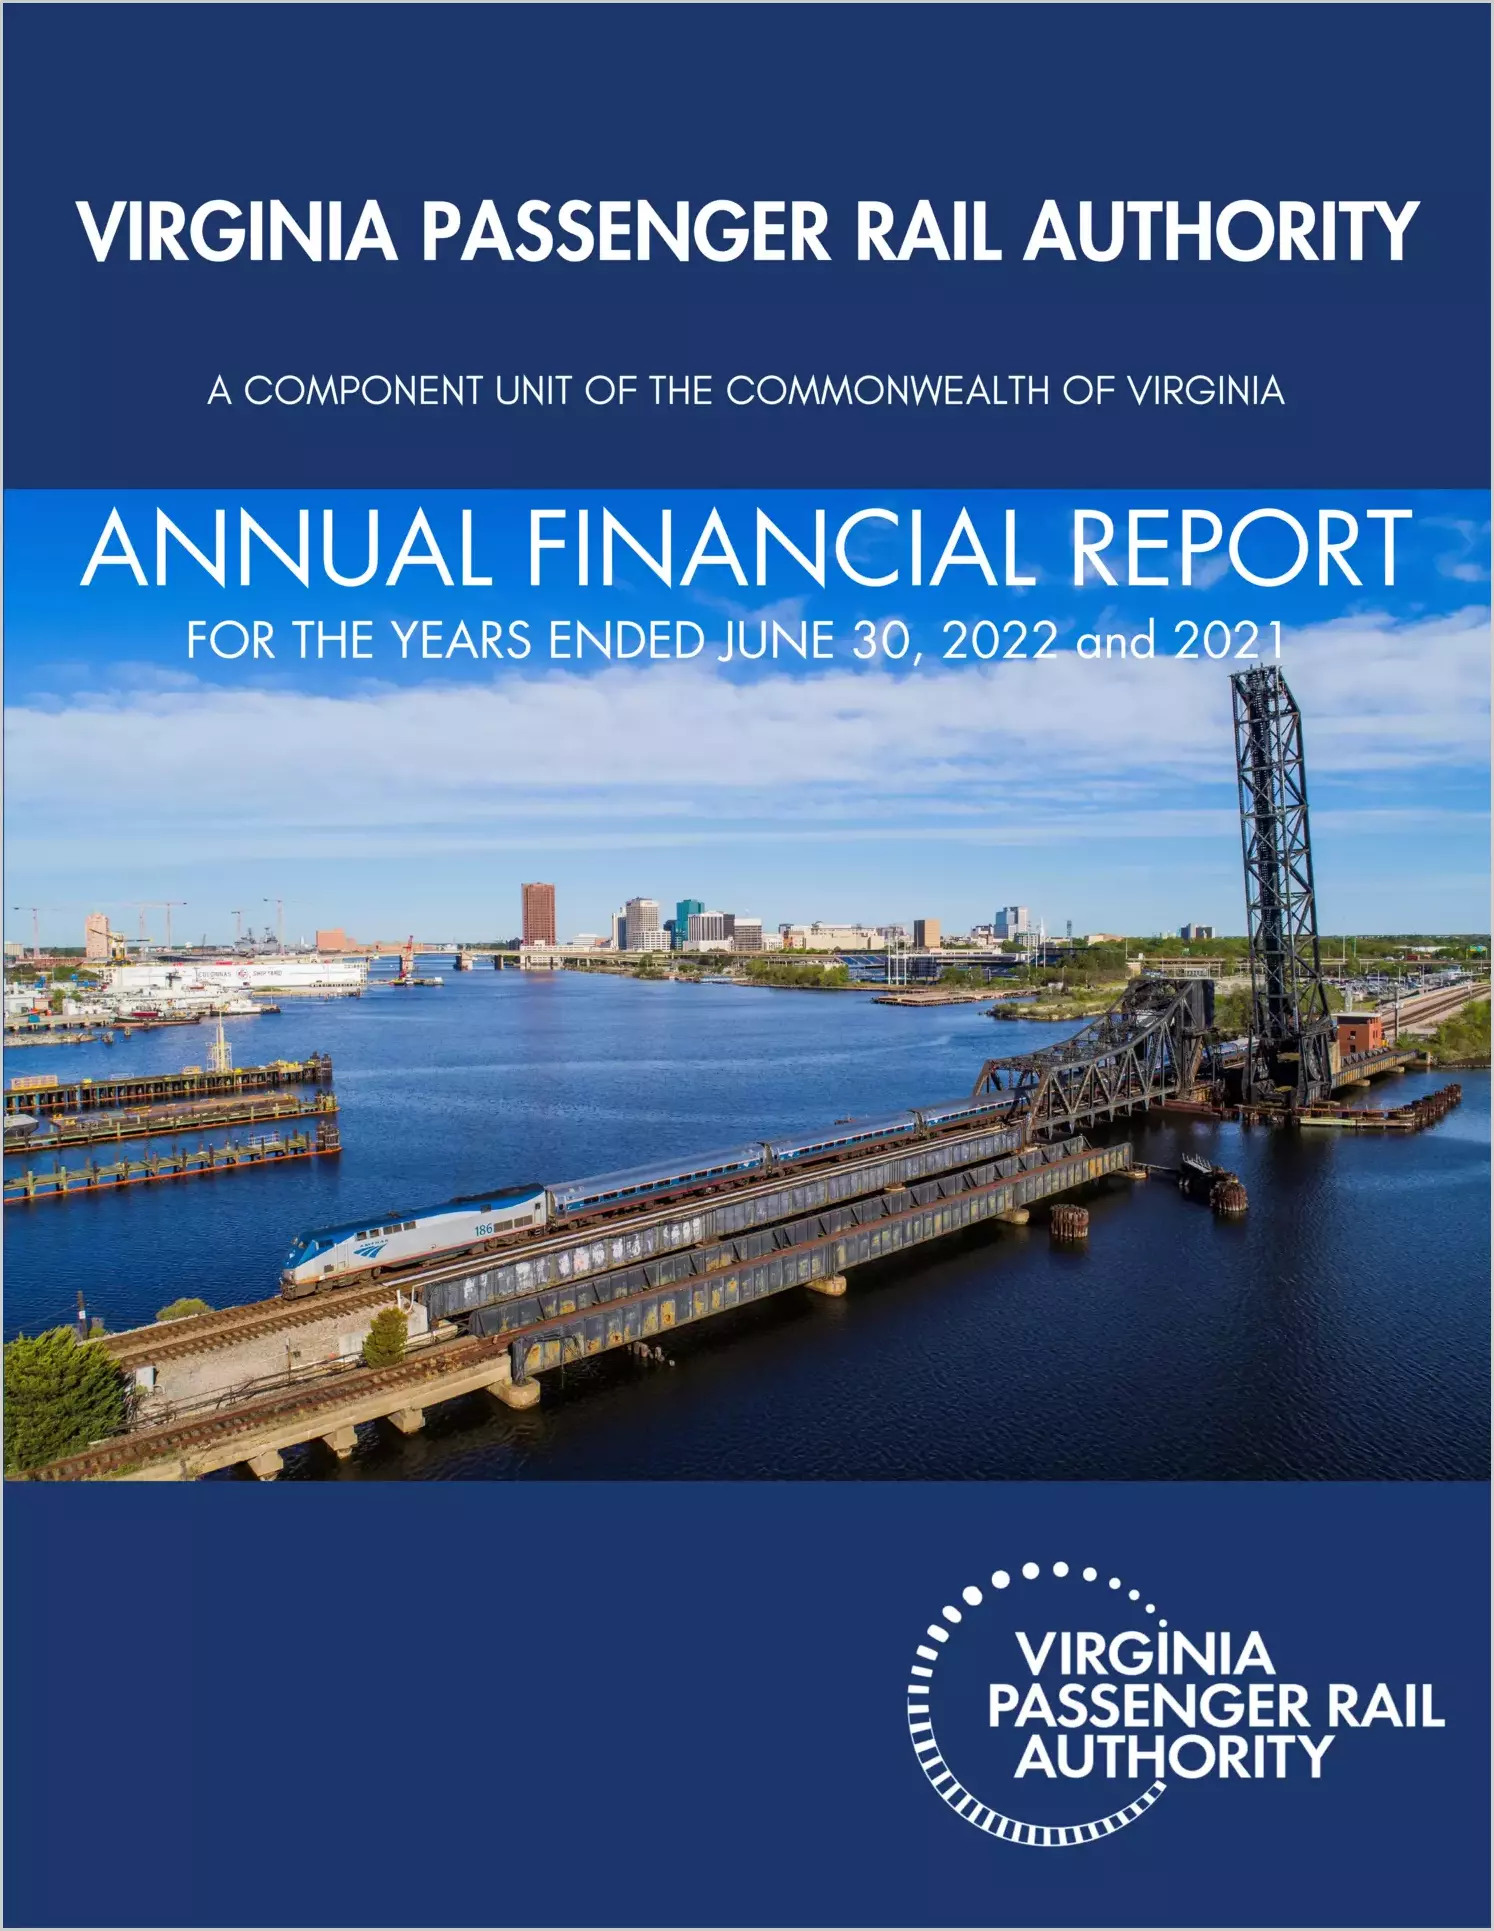 Virginia Passenger Rail Authority for the year ended June 30, 2022